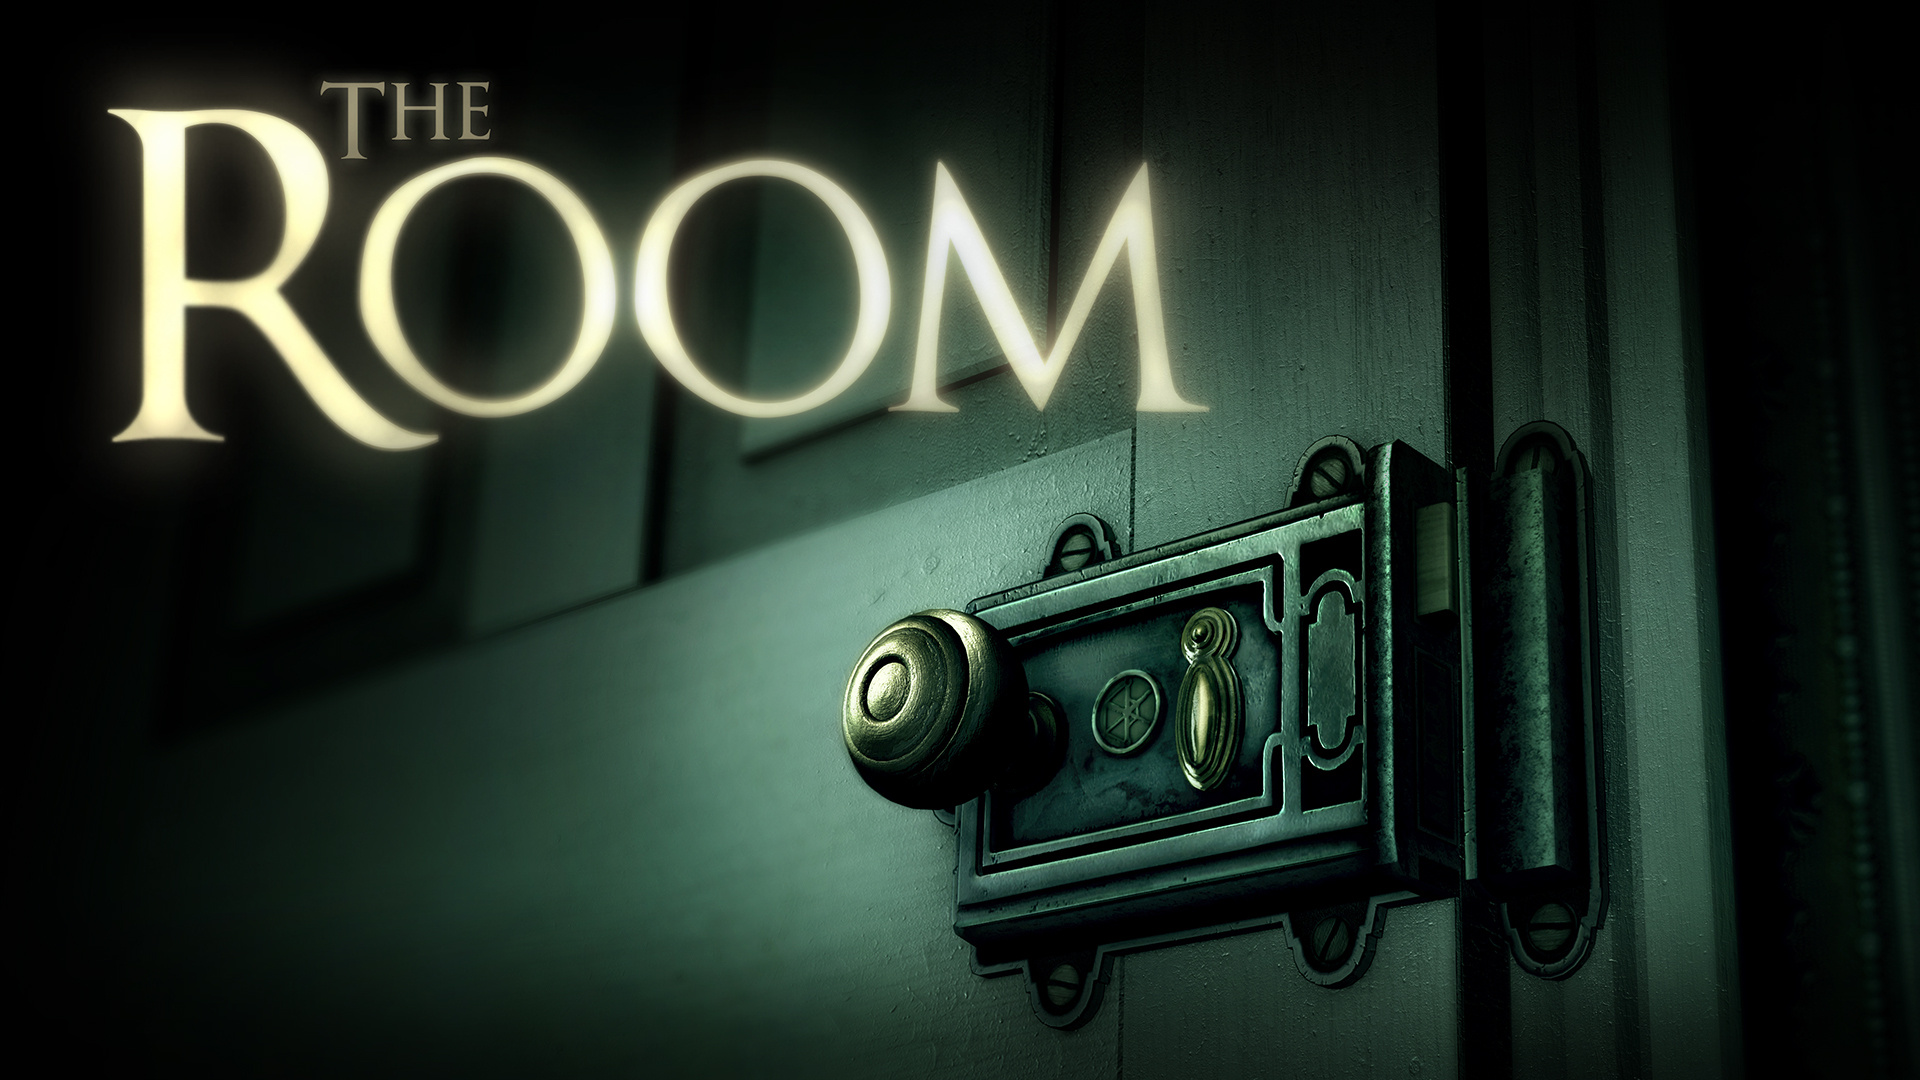 The Room: Award-winning puzzle experience, Nintendo Switch, iOS, Android, Video game. 1920x1080 Full HD Wallpaper.